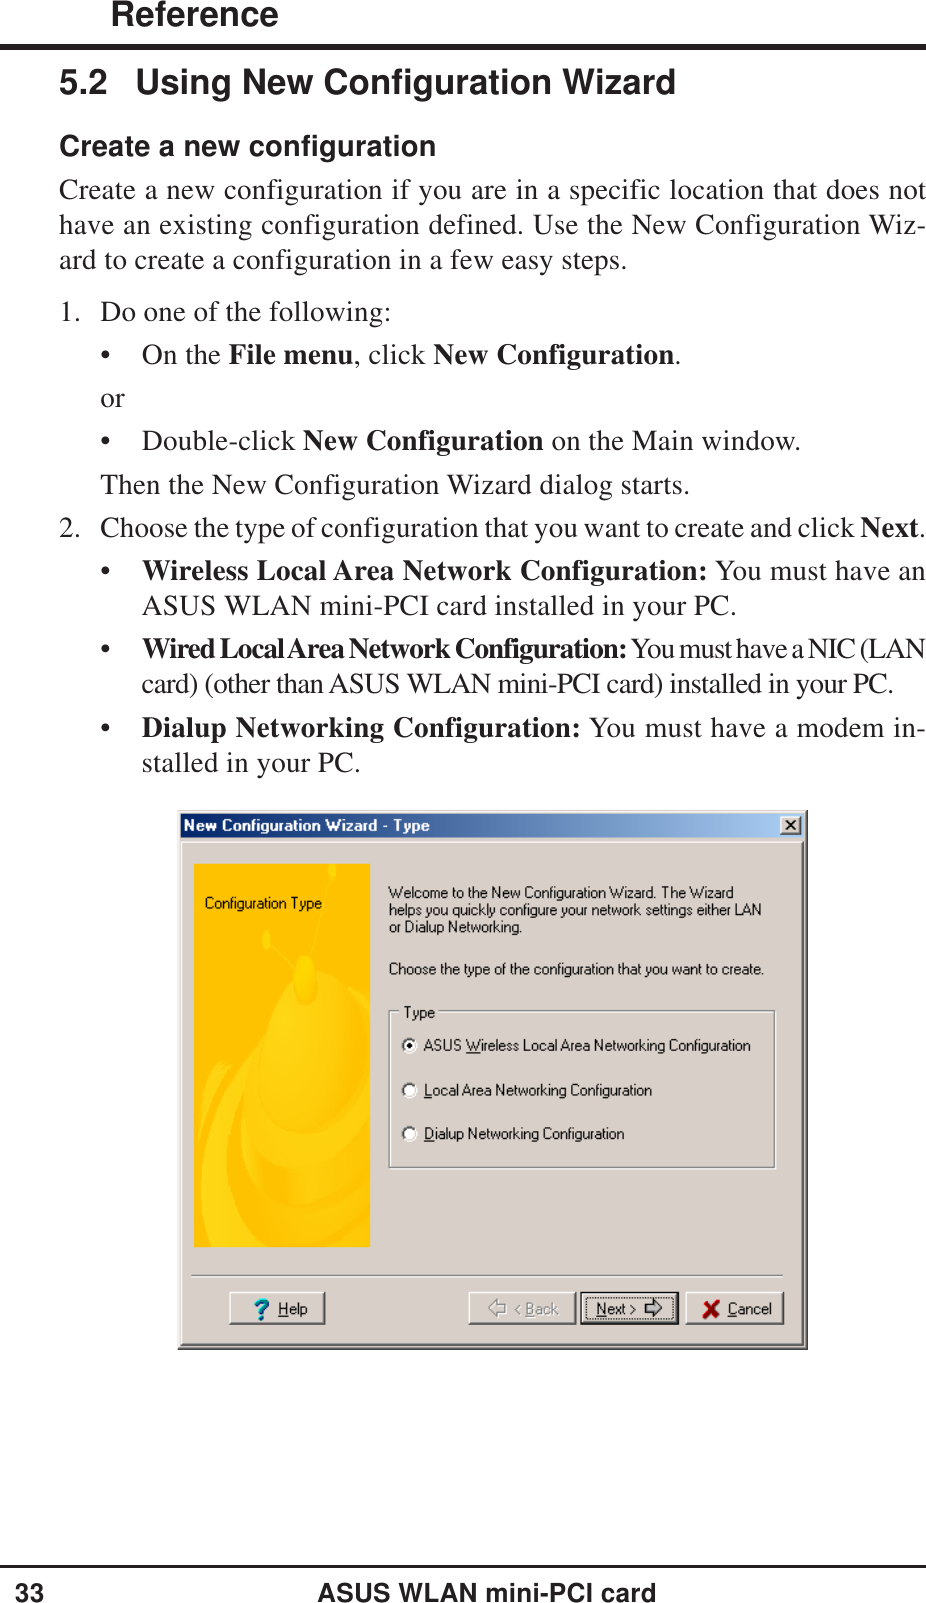 33ASUS WLAN mini-PCI card ReferenceChapter 35.2 Using New Configuration WizardCreate a new configurationCreate a new configuration if you are in a specific location that does nothave an existing configuration defined. Use the New Configuration Wiz-ard to create a configuration in a few easy steps.1. Do one of the following:• On the File menu, click New Configuration.or• Double-click New Configuration on the Main window.Then the New Configuration Wizard dialog starts.2. Choose the type of configuration that you want to create and click Next.•Wireless Local Area Network Configuration: You must have anASUS WLAN mini-PCI card installed in your PC.•Wired Local Area Network Configuration: You must have a NIC (LANcard) (other than ASUS WLAN mini-PCI card) installed in your PC.•Dialup Networking Configuration: You must have a modem in-stalled in your PC.